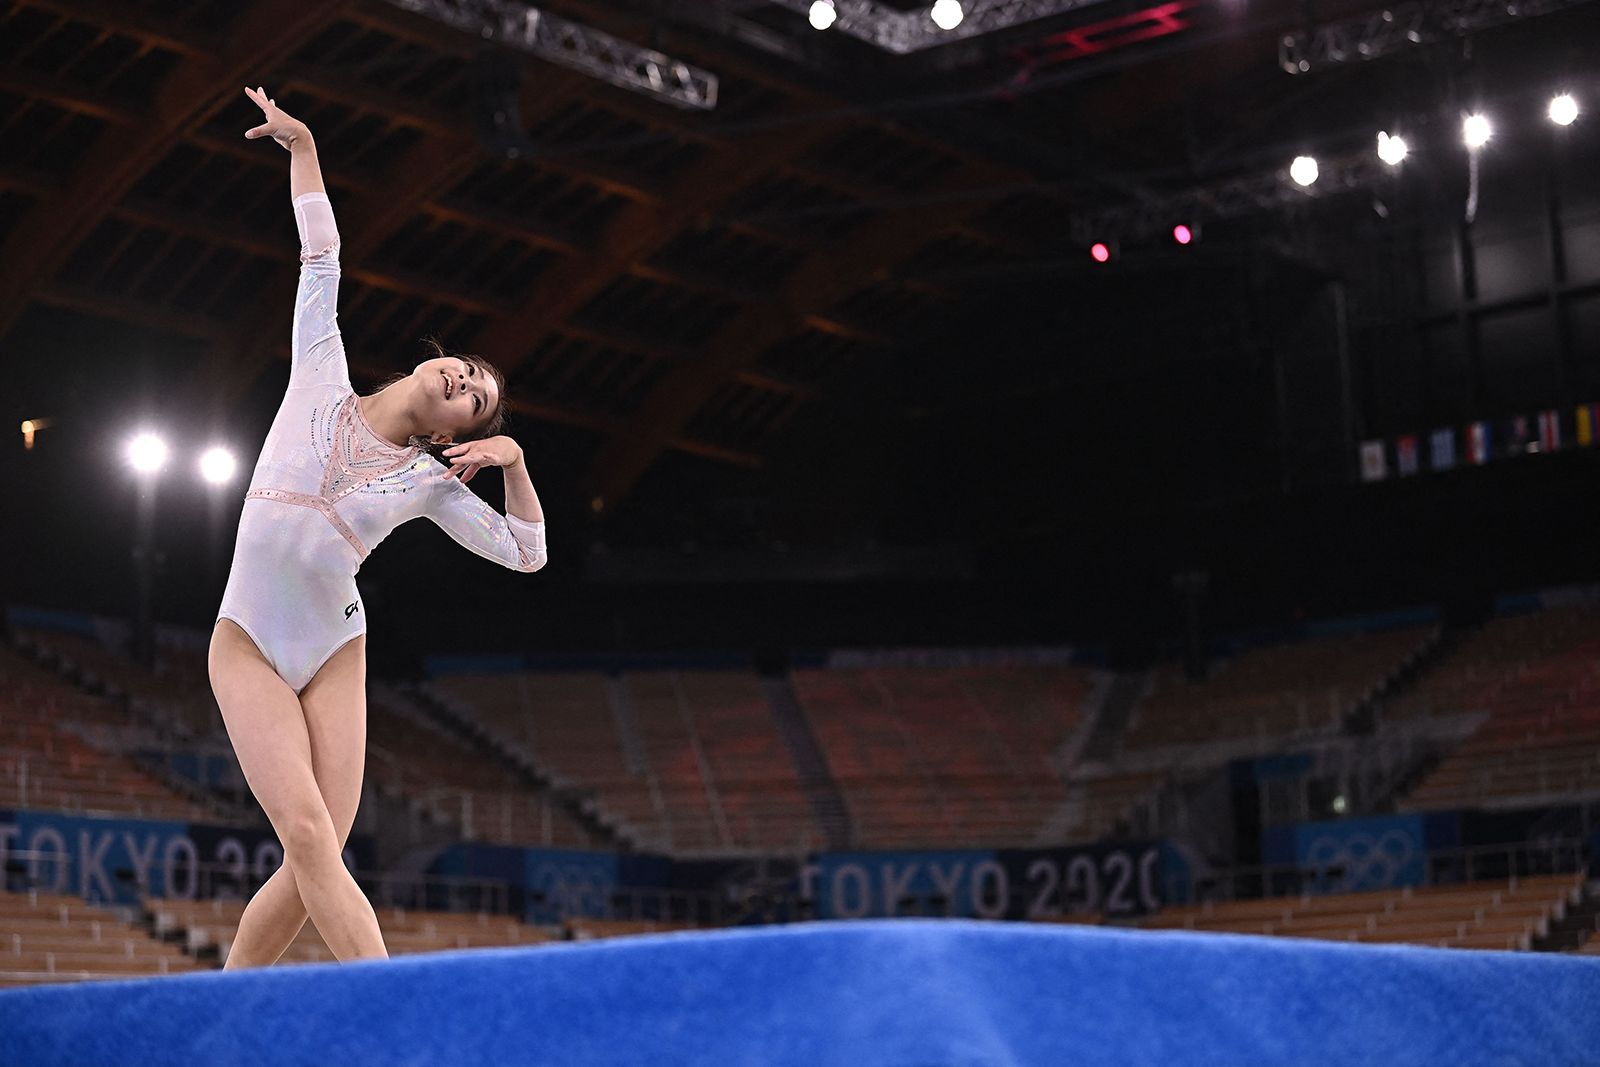 Female Gymnasts Use Music While Men